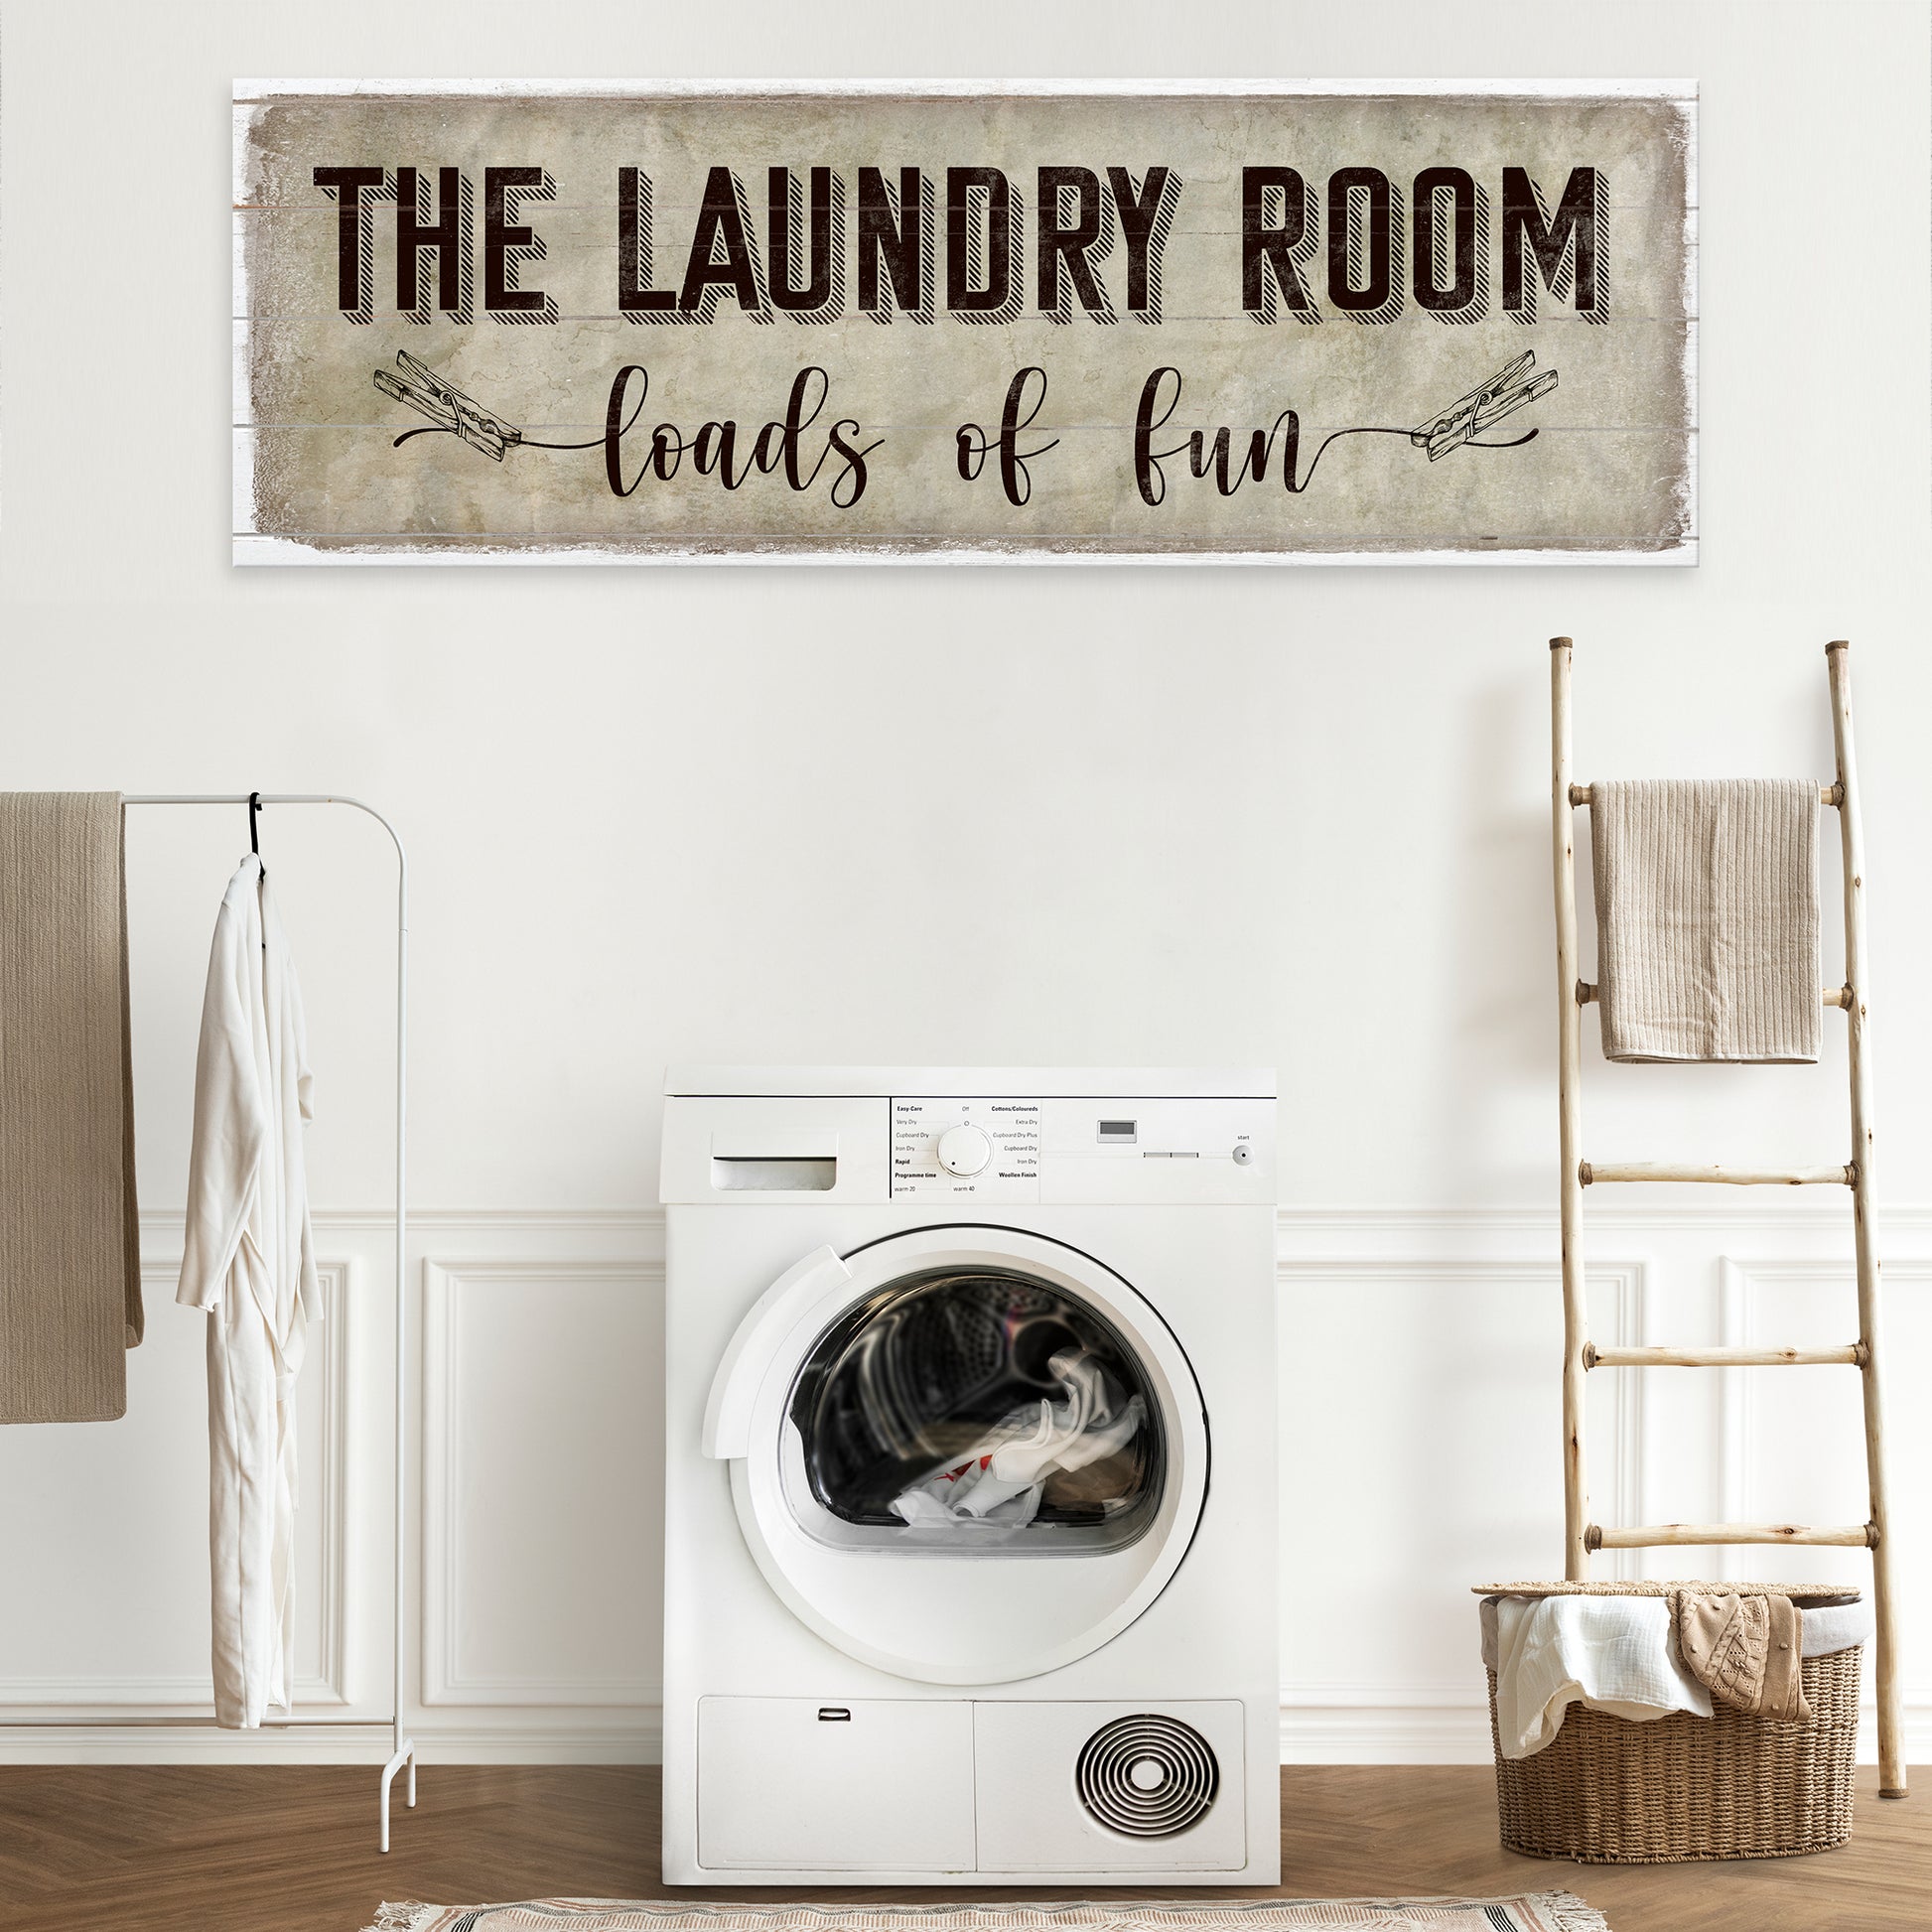 Loads of Fun The Laundry Room Sign - Image by Tailored Canvases